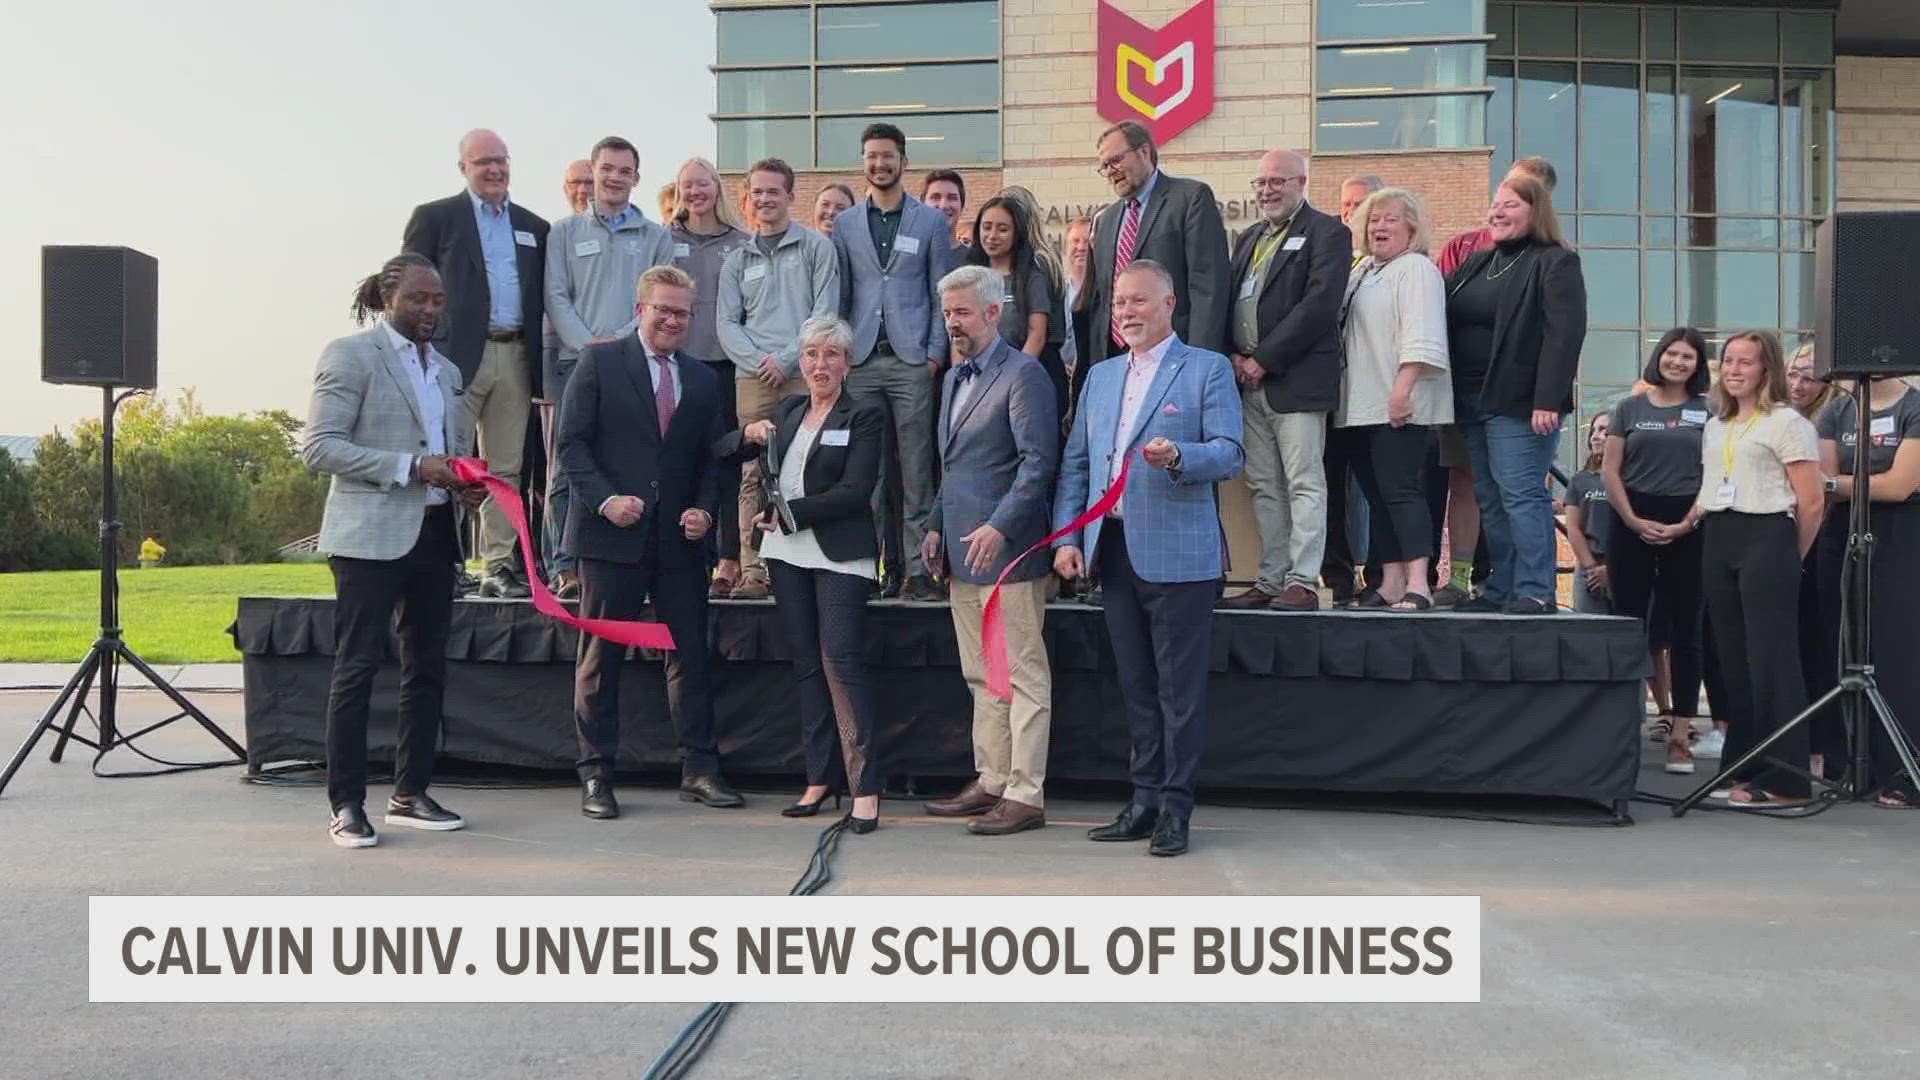 Thanks to a $22.25 million donation anonymously gifted to the university in 2021, there was a ribbon cutting for the brand new School of Business Wednesday night.